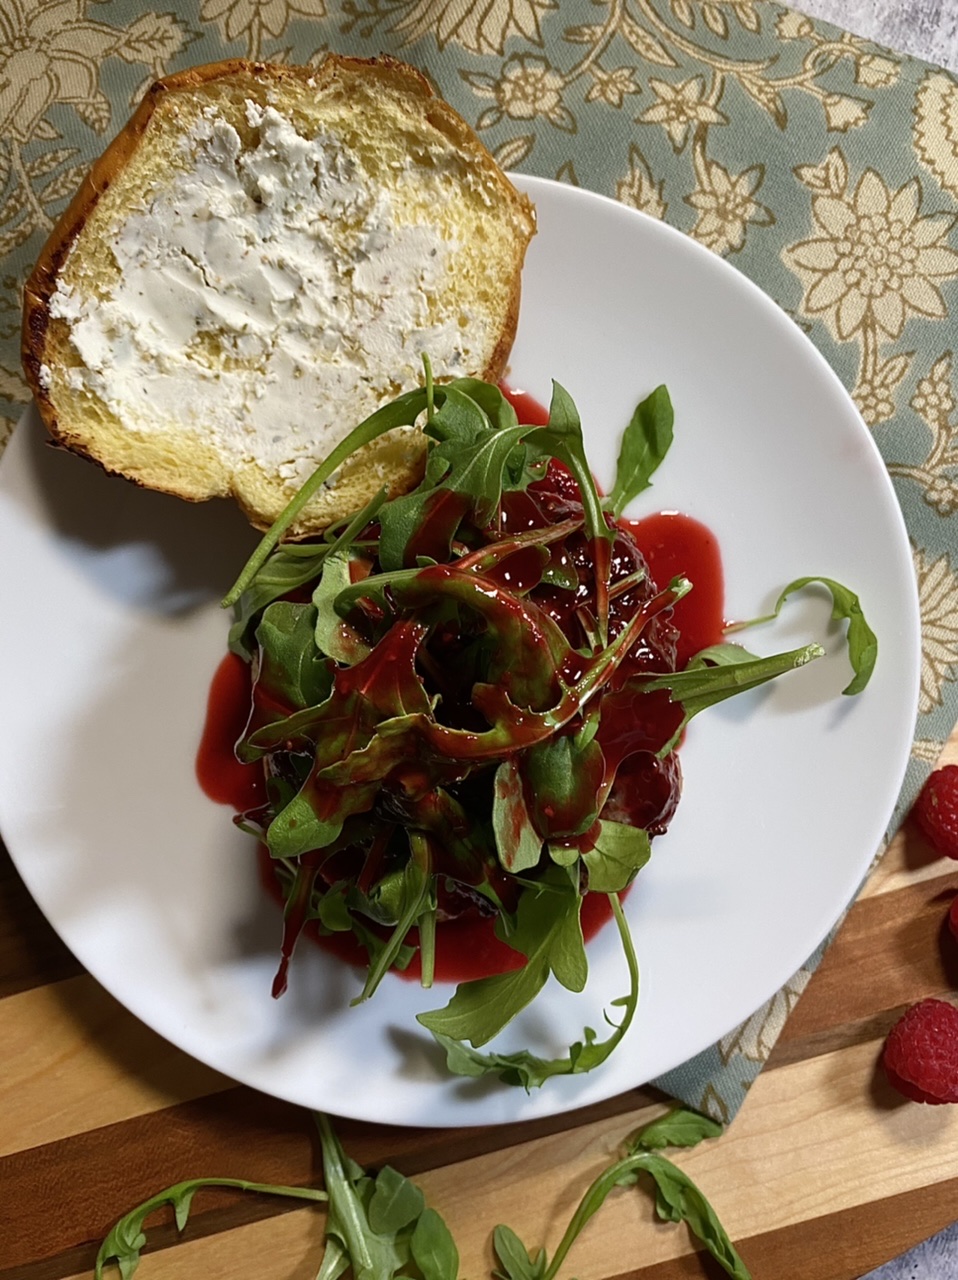 Venison burger with arugula and raspberry sauce on a white plate on top of a cutting board